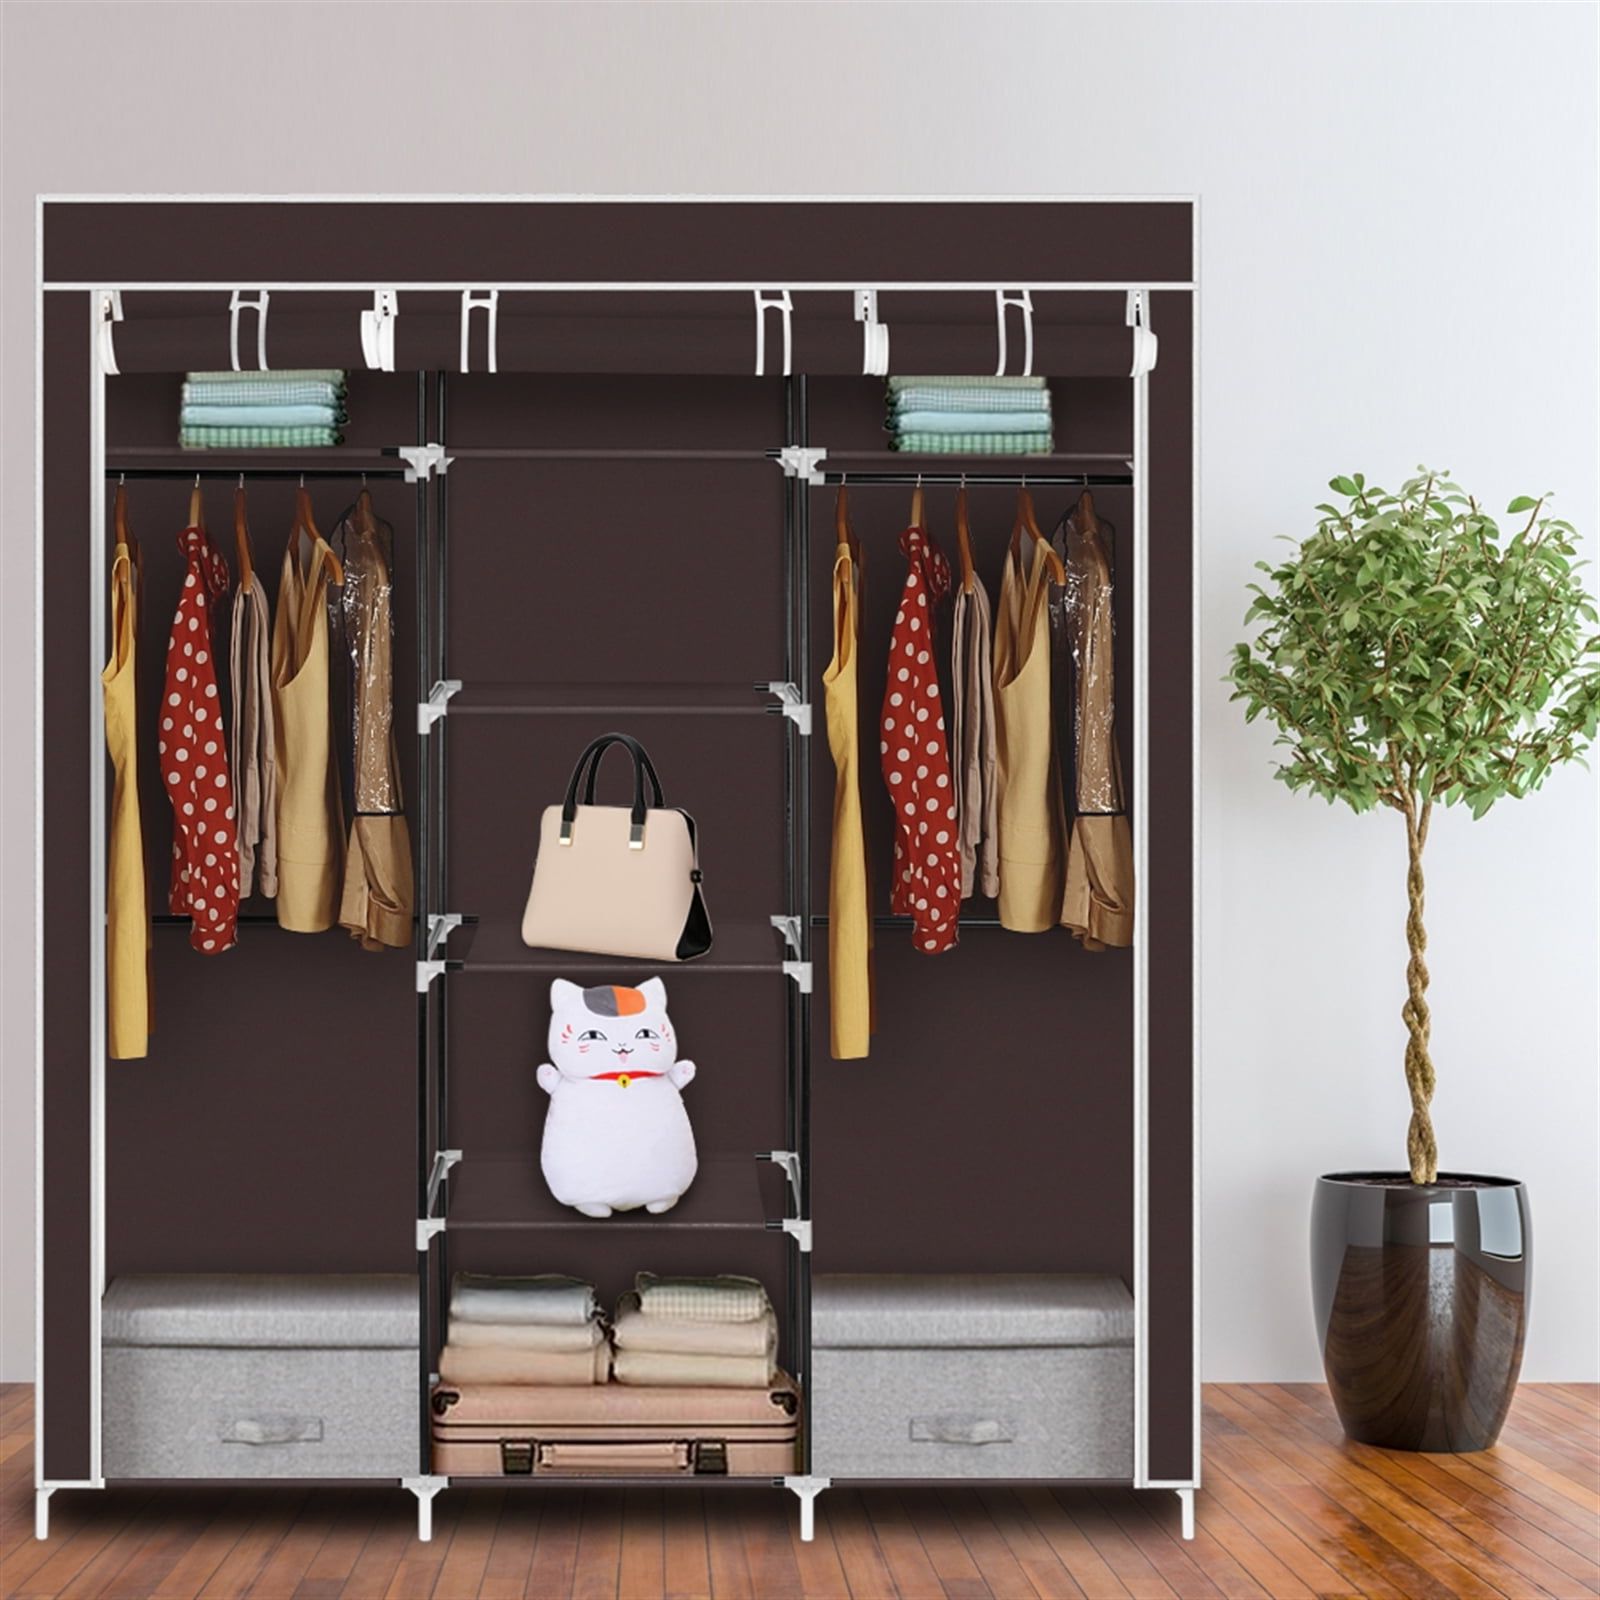 5 Tiers Wardrobes Intended For 2018 Hassch 5 Tiers Wardrobe Closet Portable Clothes Storage Organizer With  Double Hanging Rod For Bedroom, Dark Brown – Walmart (View 4 of 10)